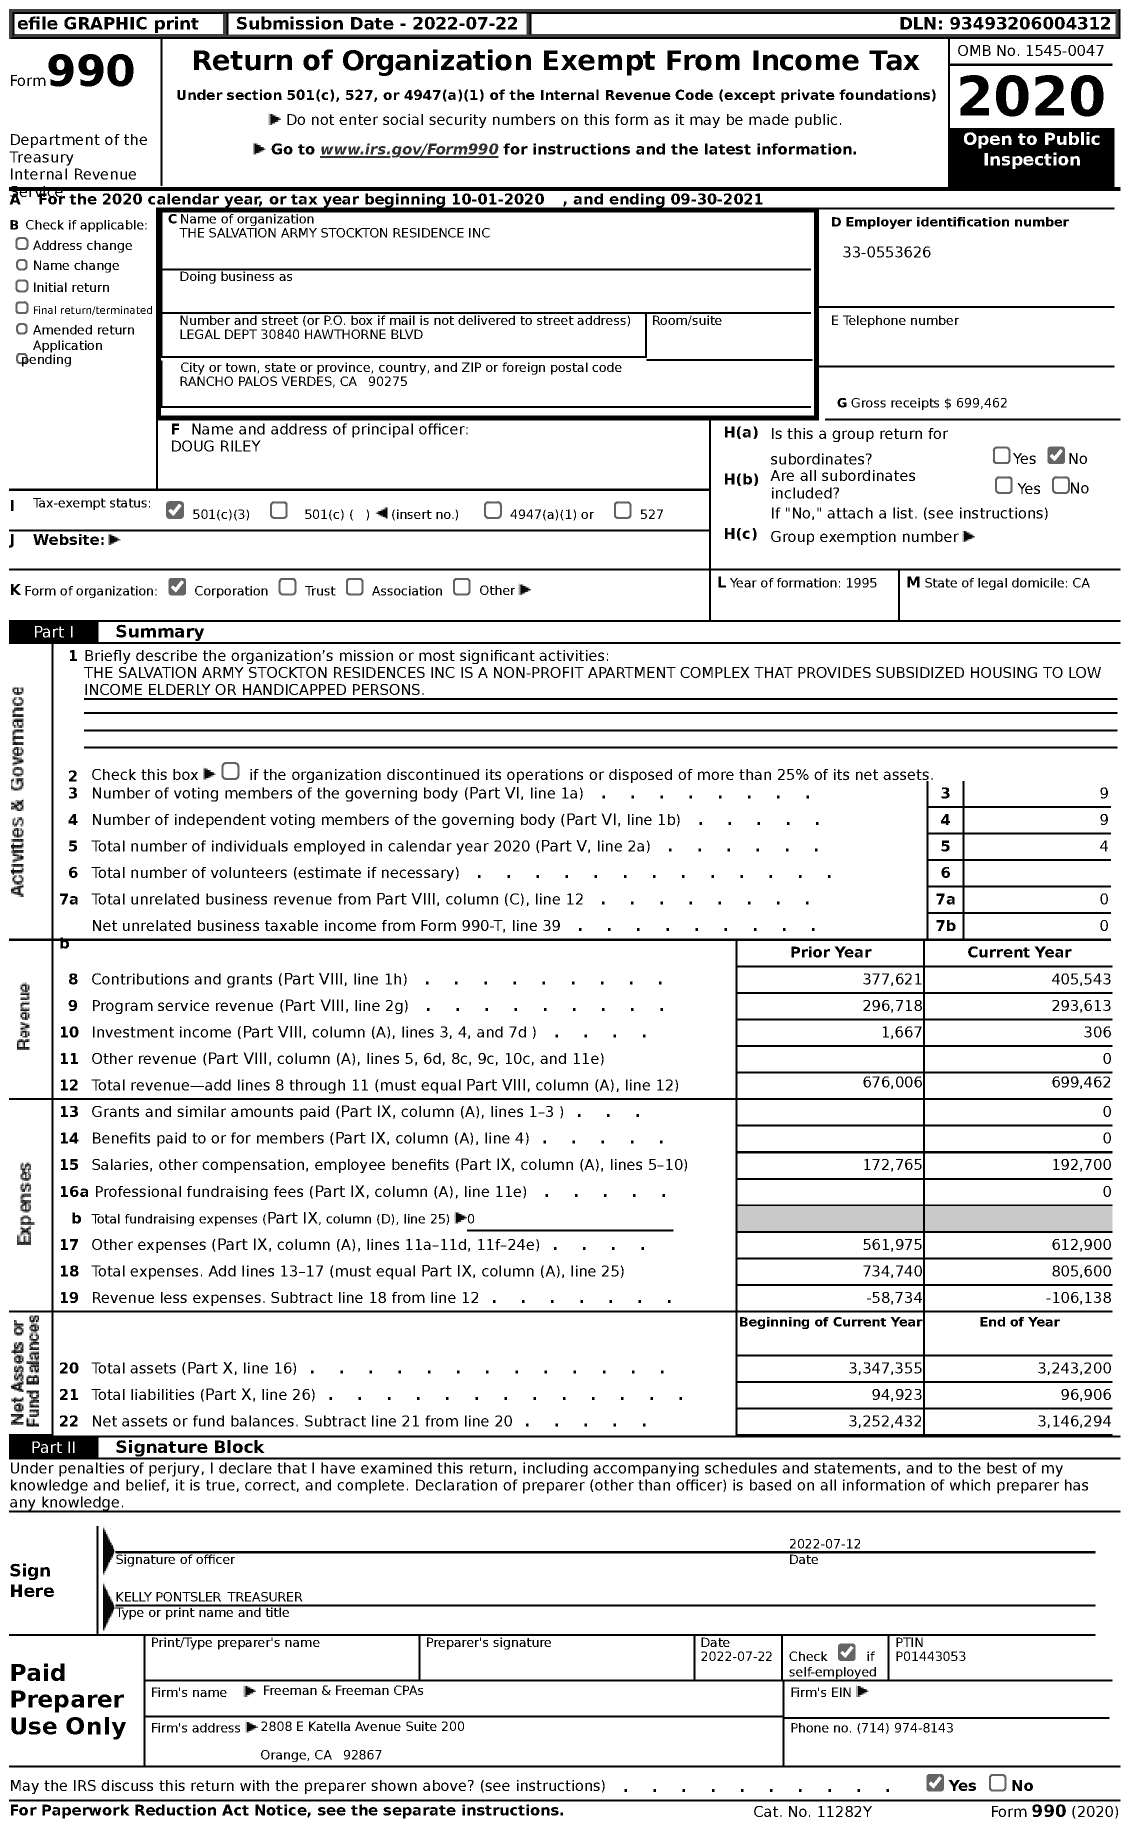 Image of first page of 2020 Form 990 for The Salvation Army Stockton Residence